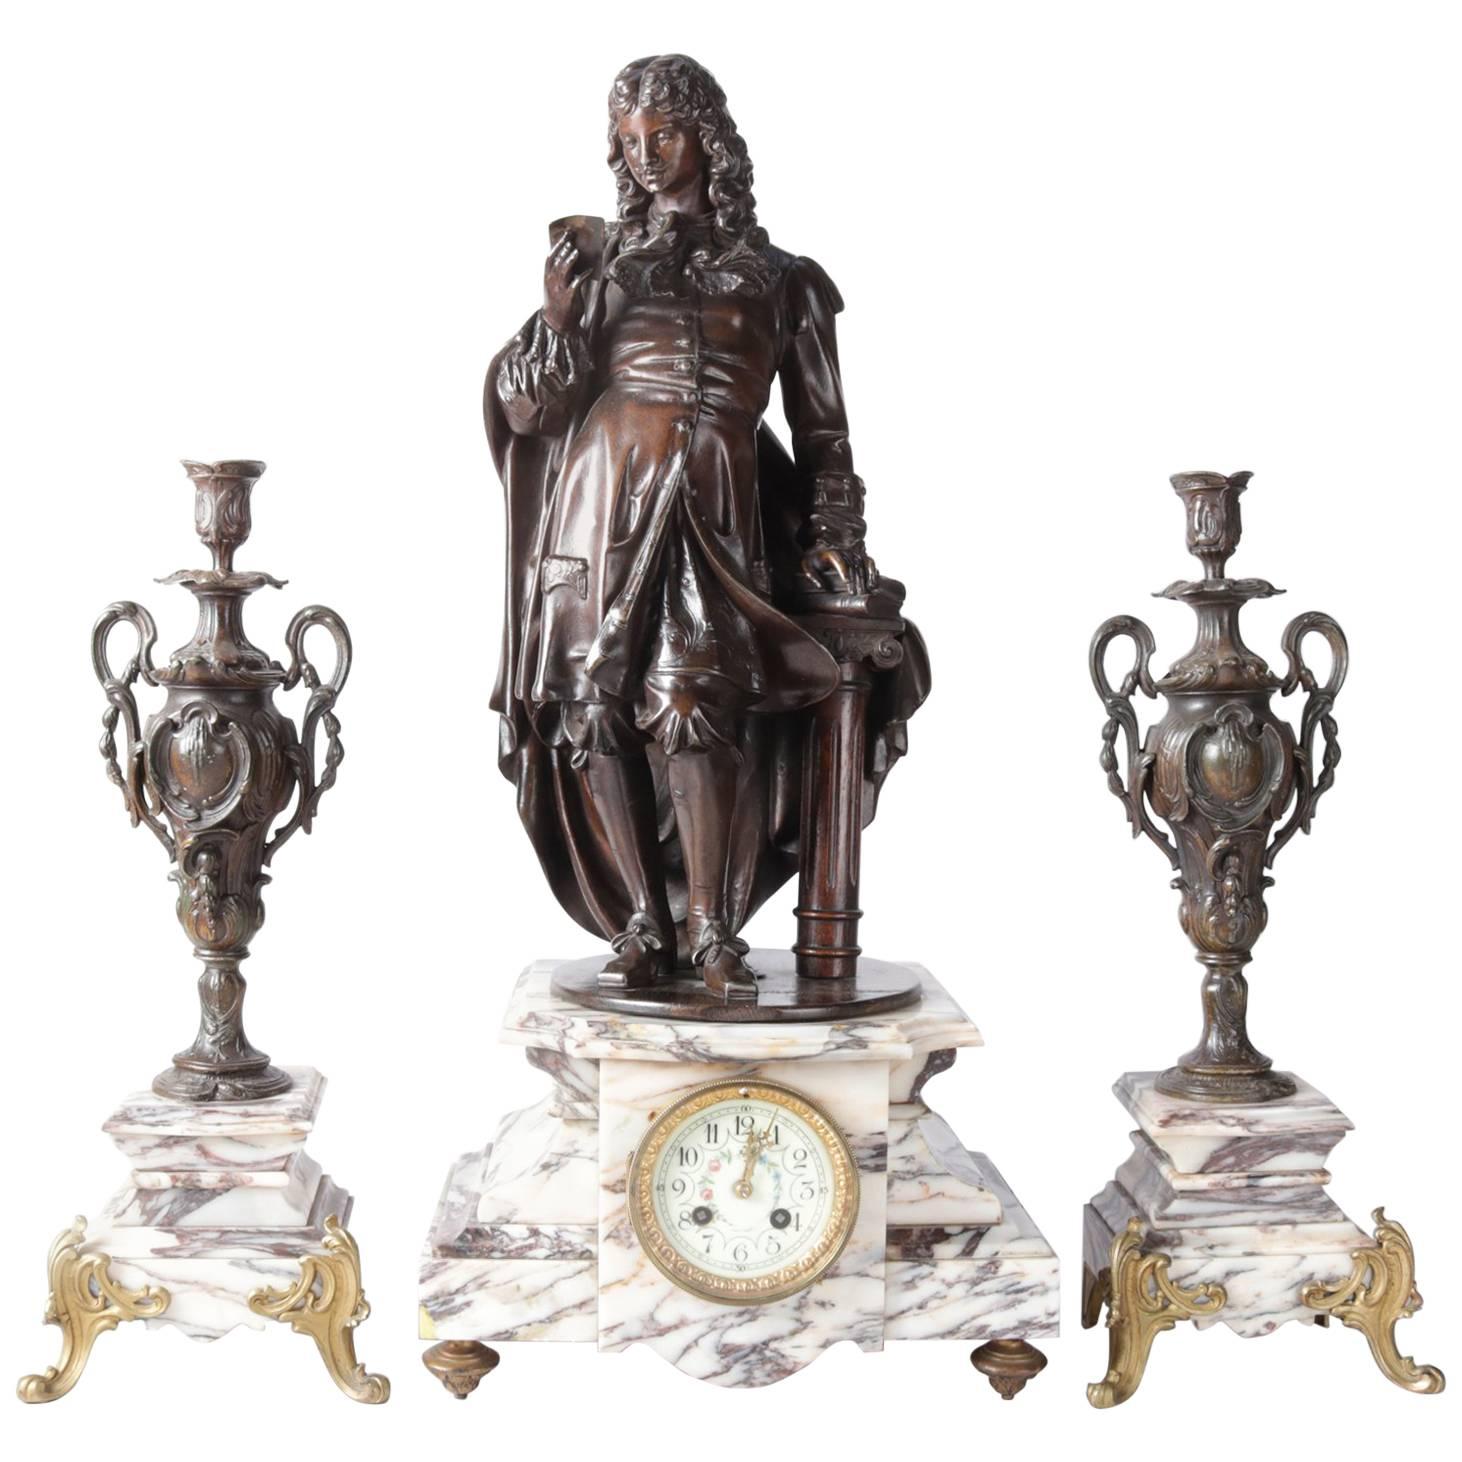 French Figural Bronzed and Marble Louis XIV Garniture Clock and Candles Set